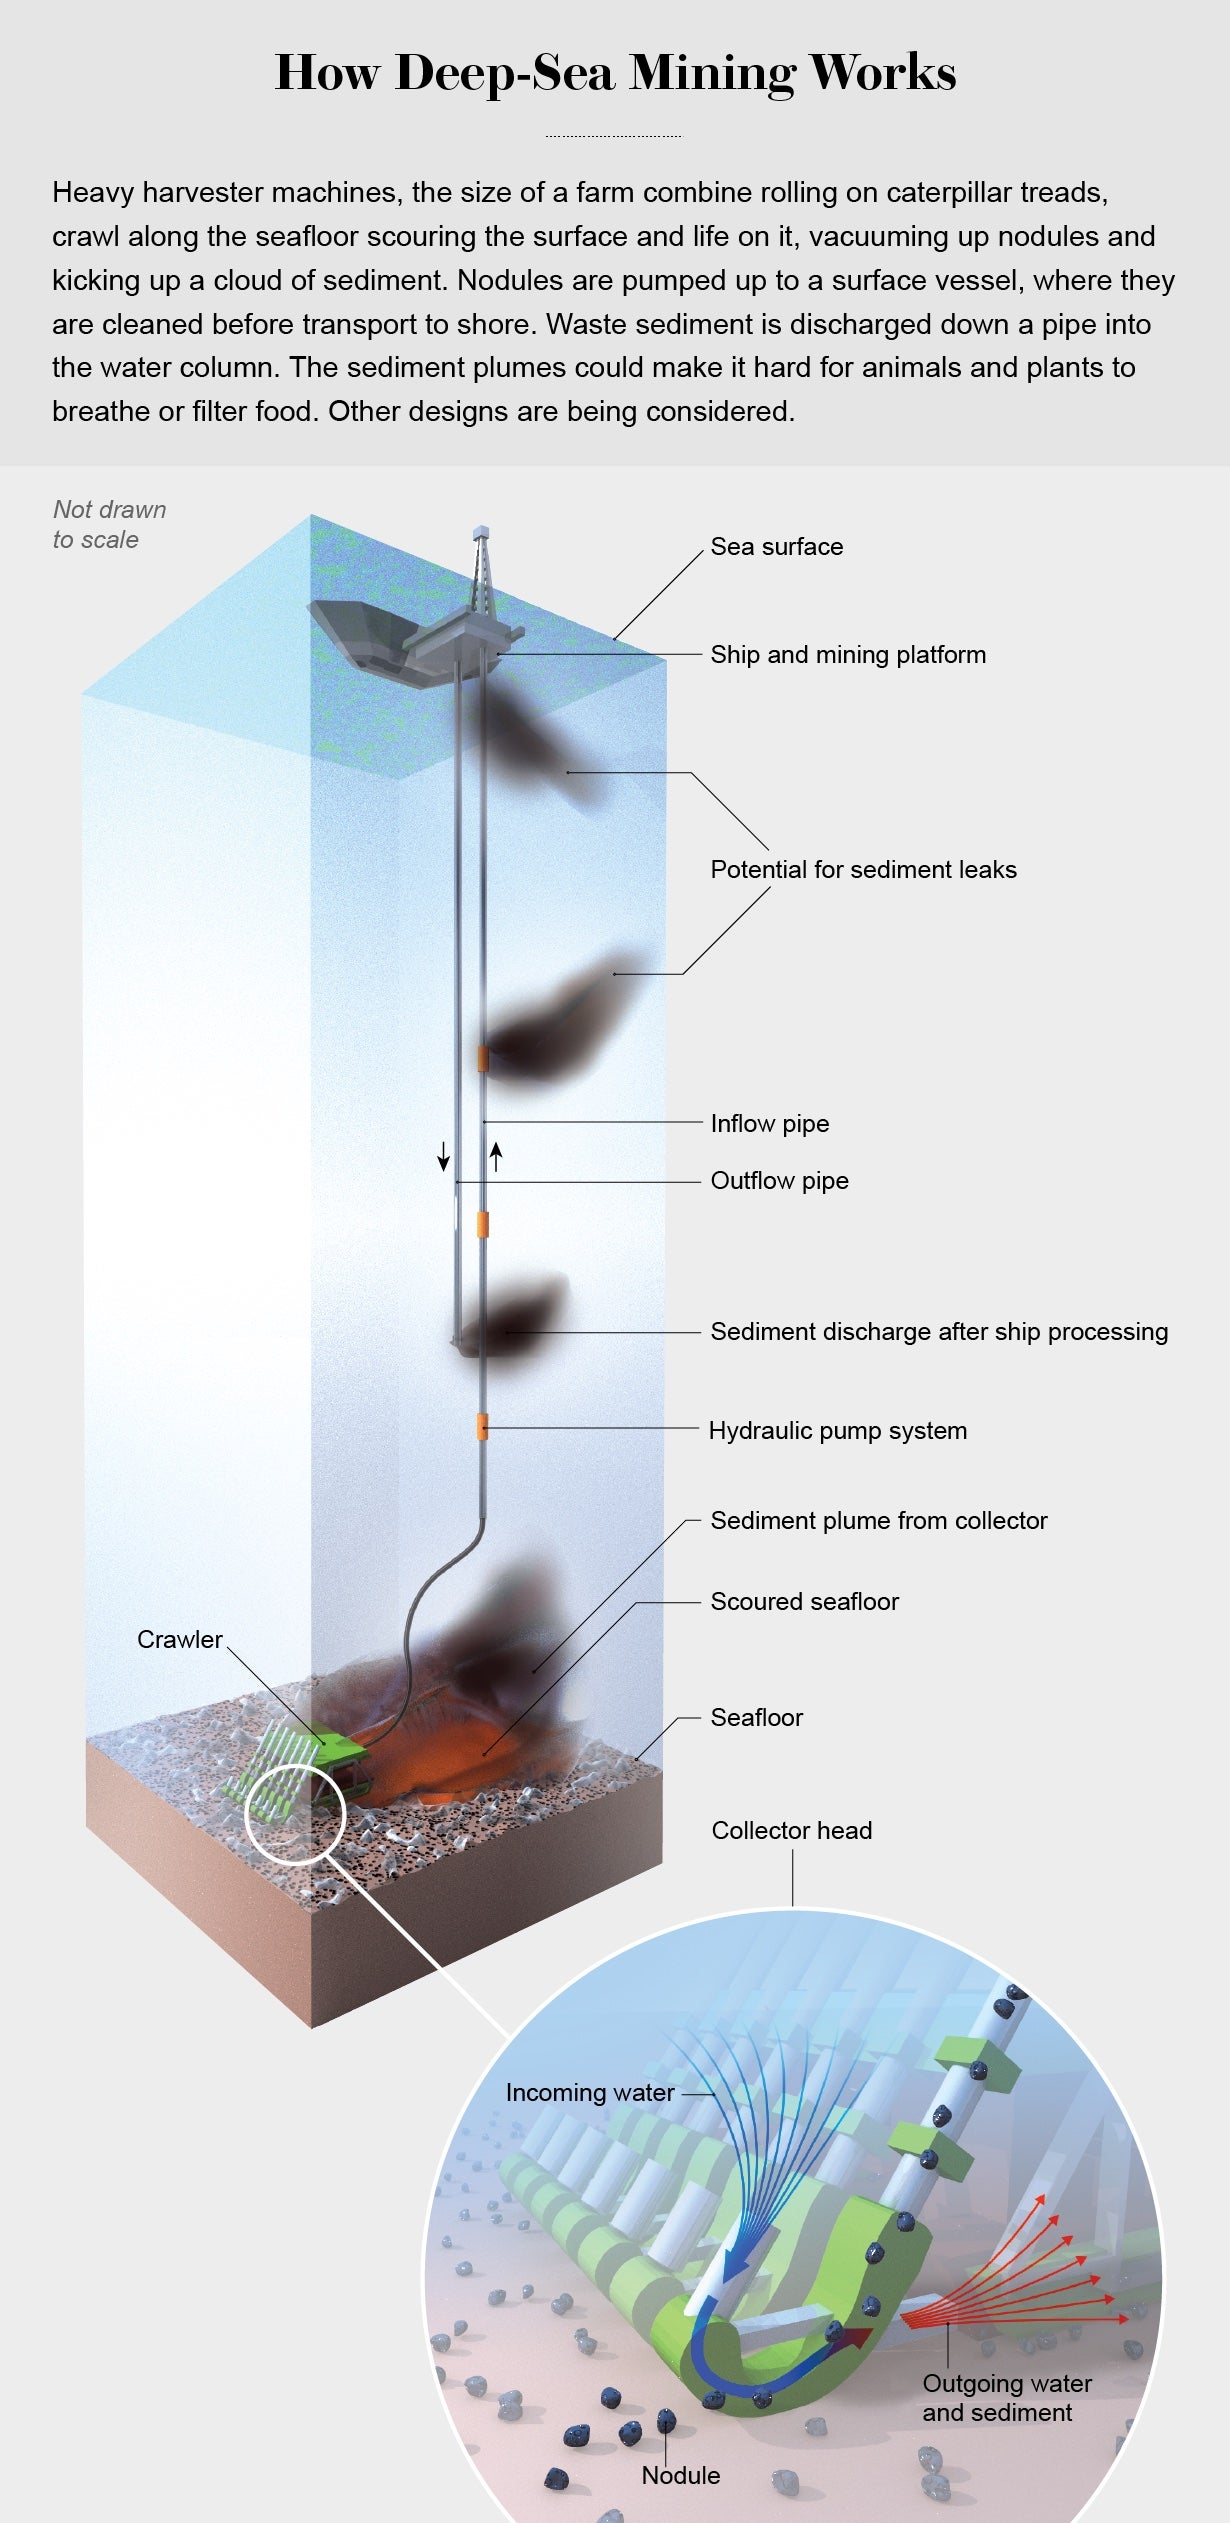 Graphic shows how harvester machines scour the seafloor, vacuuming up nodules and pumping them up to a surface vessel, kicking up sediment plumes in the process.